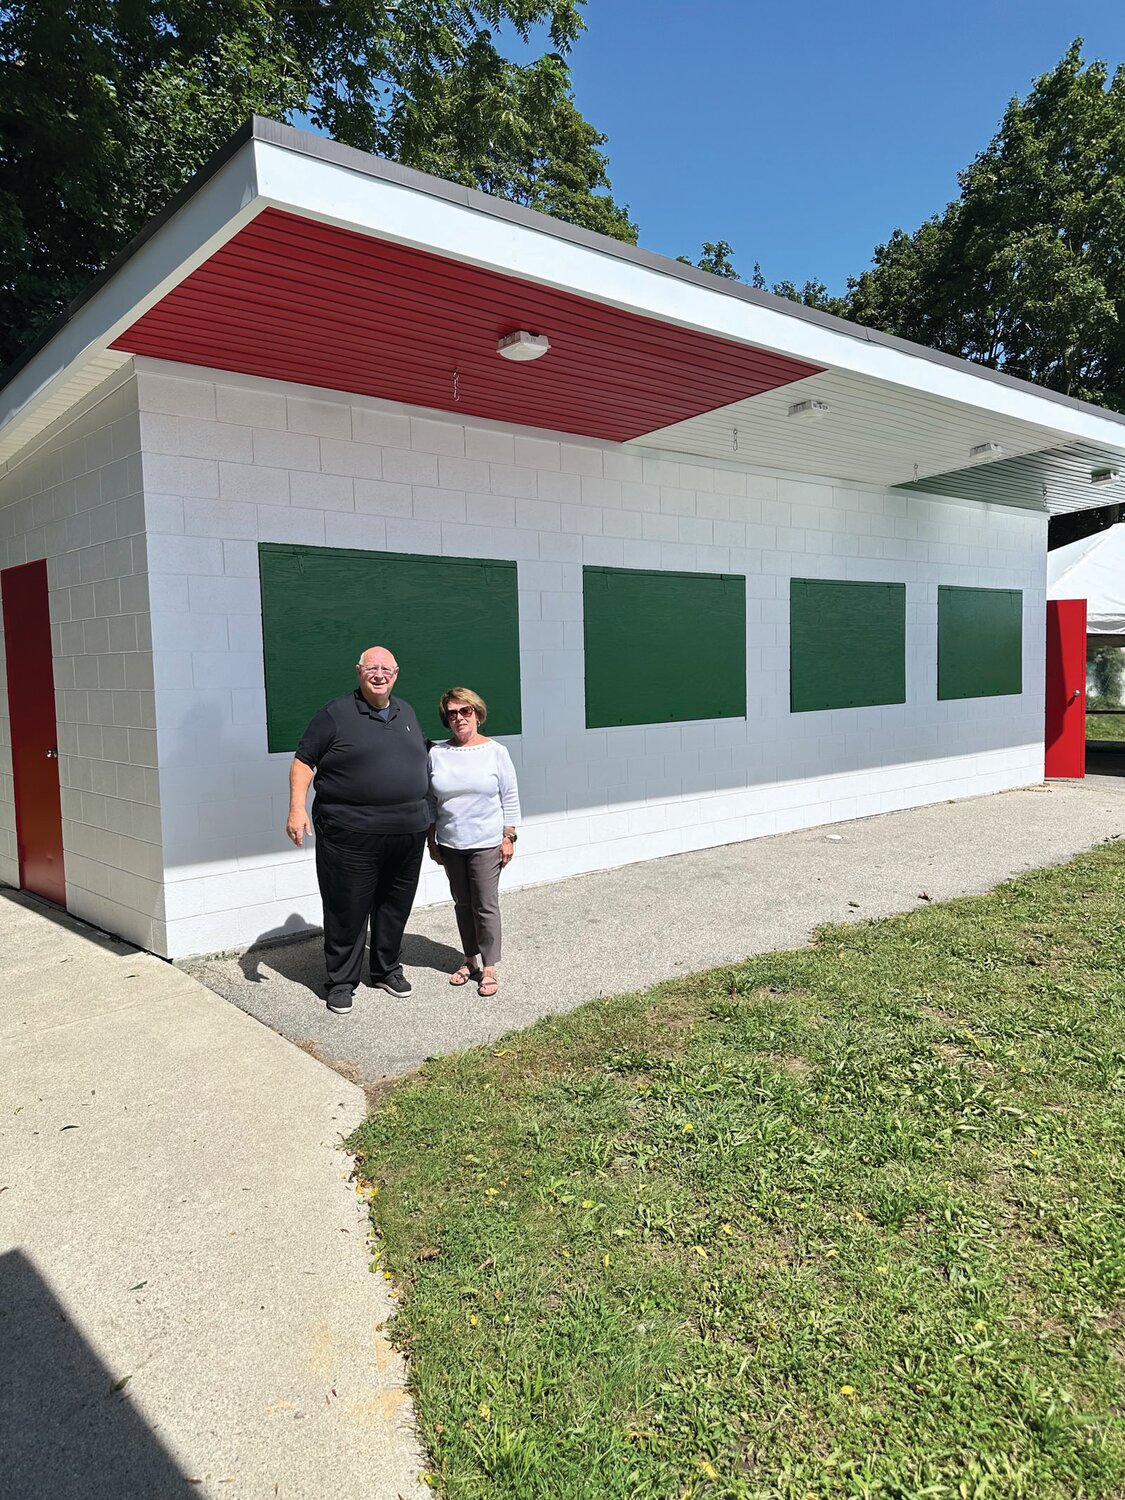 PROUD PALS: Rev. Peter J. Gower and Feast Chairperson Joanne Burley are smiling while standing under one of the newly painted food buildings where volunteer cooks will serve a variety of delicious Italian food through Sunday.